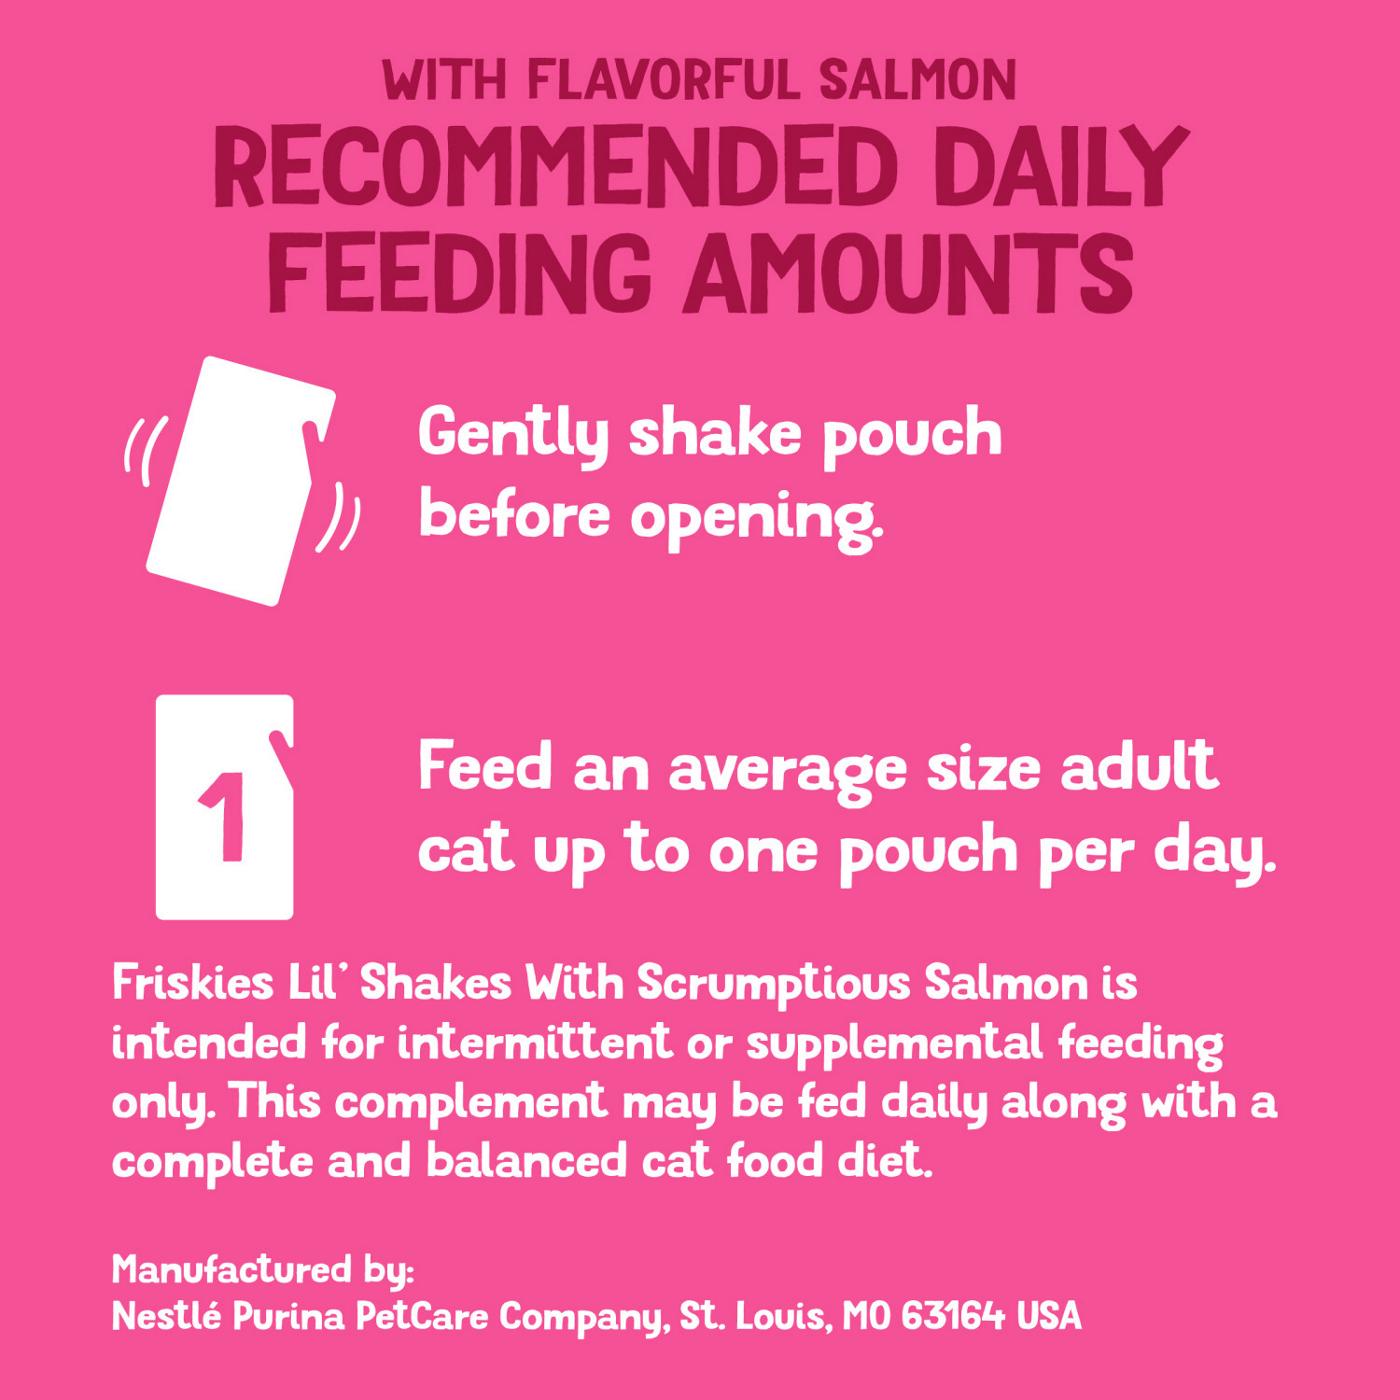 Friskies Purina Friskies Pureed Cat Food Topper, Lil’ Shakes With Scrumptious Salmon Lickable Cat Treats; image 4 of 8